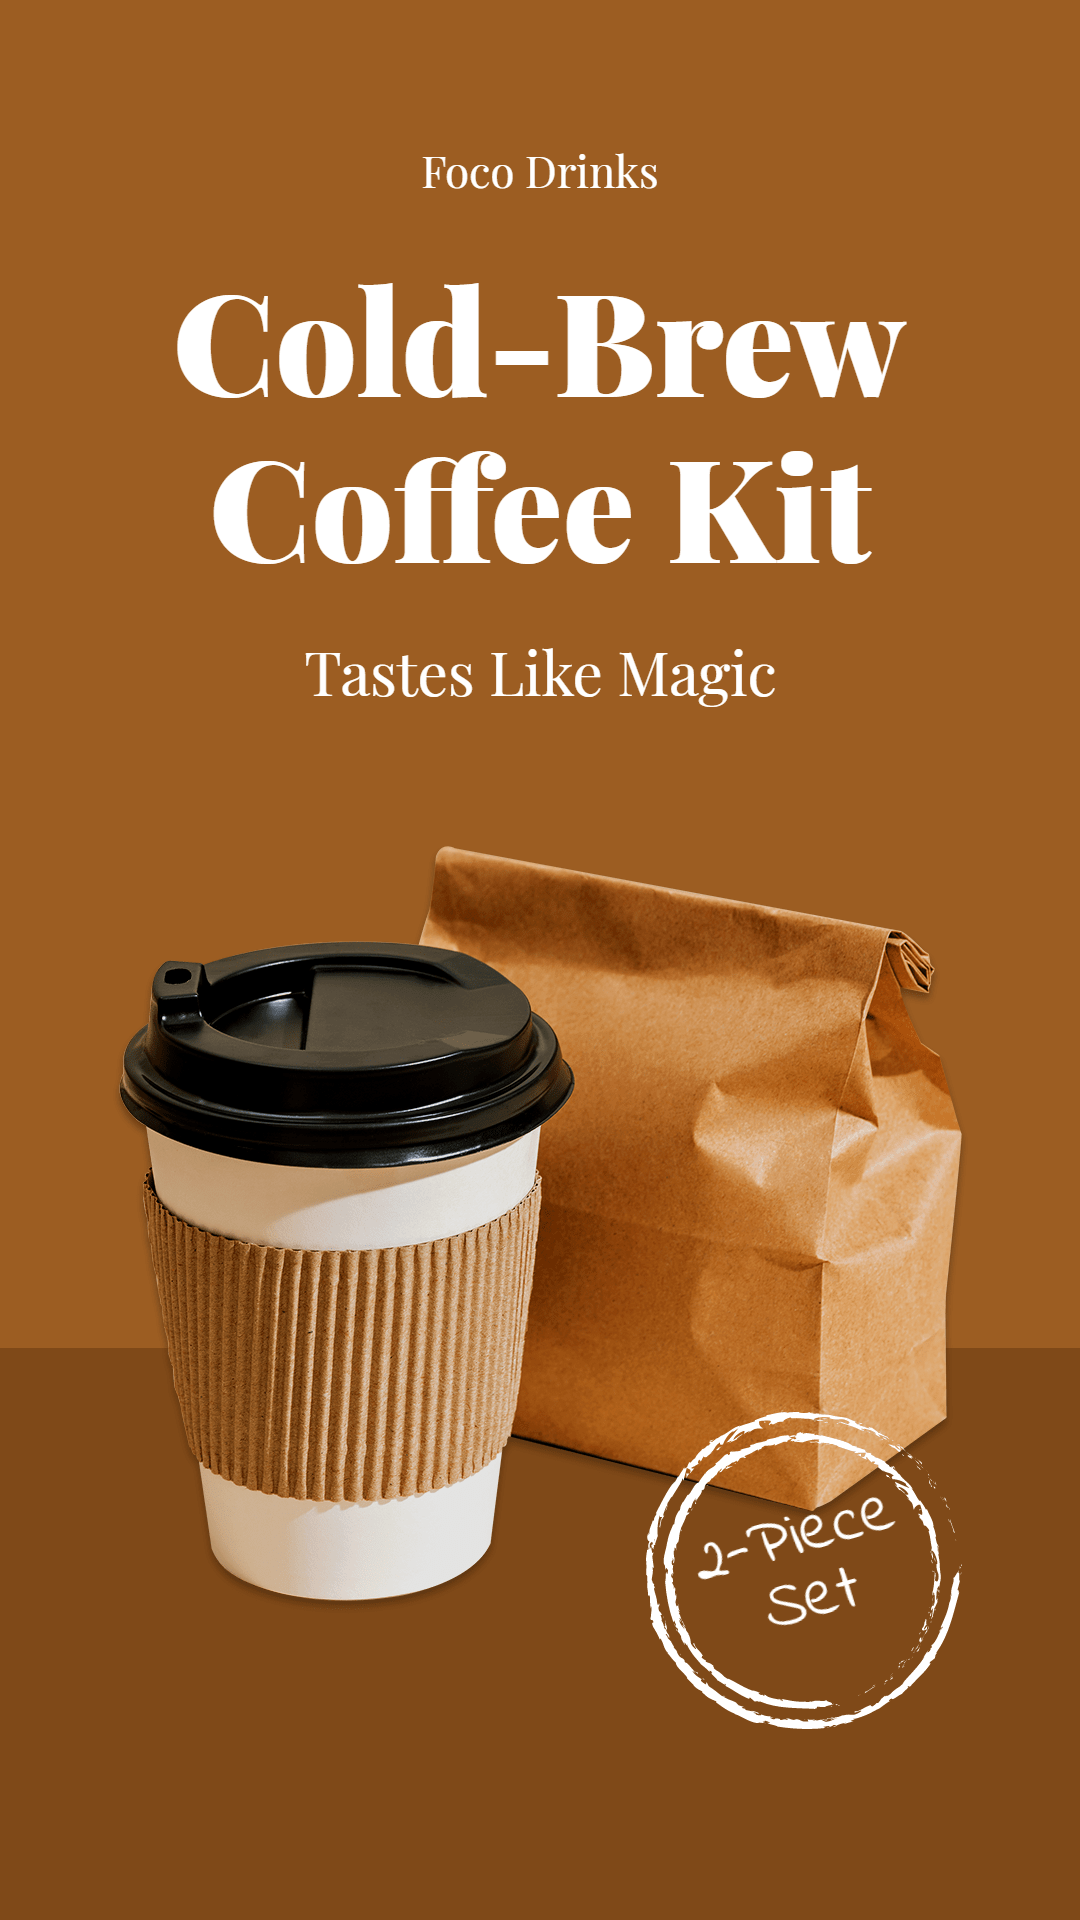 Retro Style Cold-Brew Coffee Kit Promotion Ecommerce Story预览效果